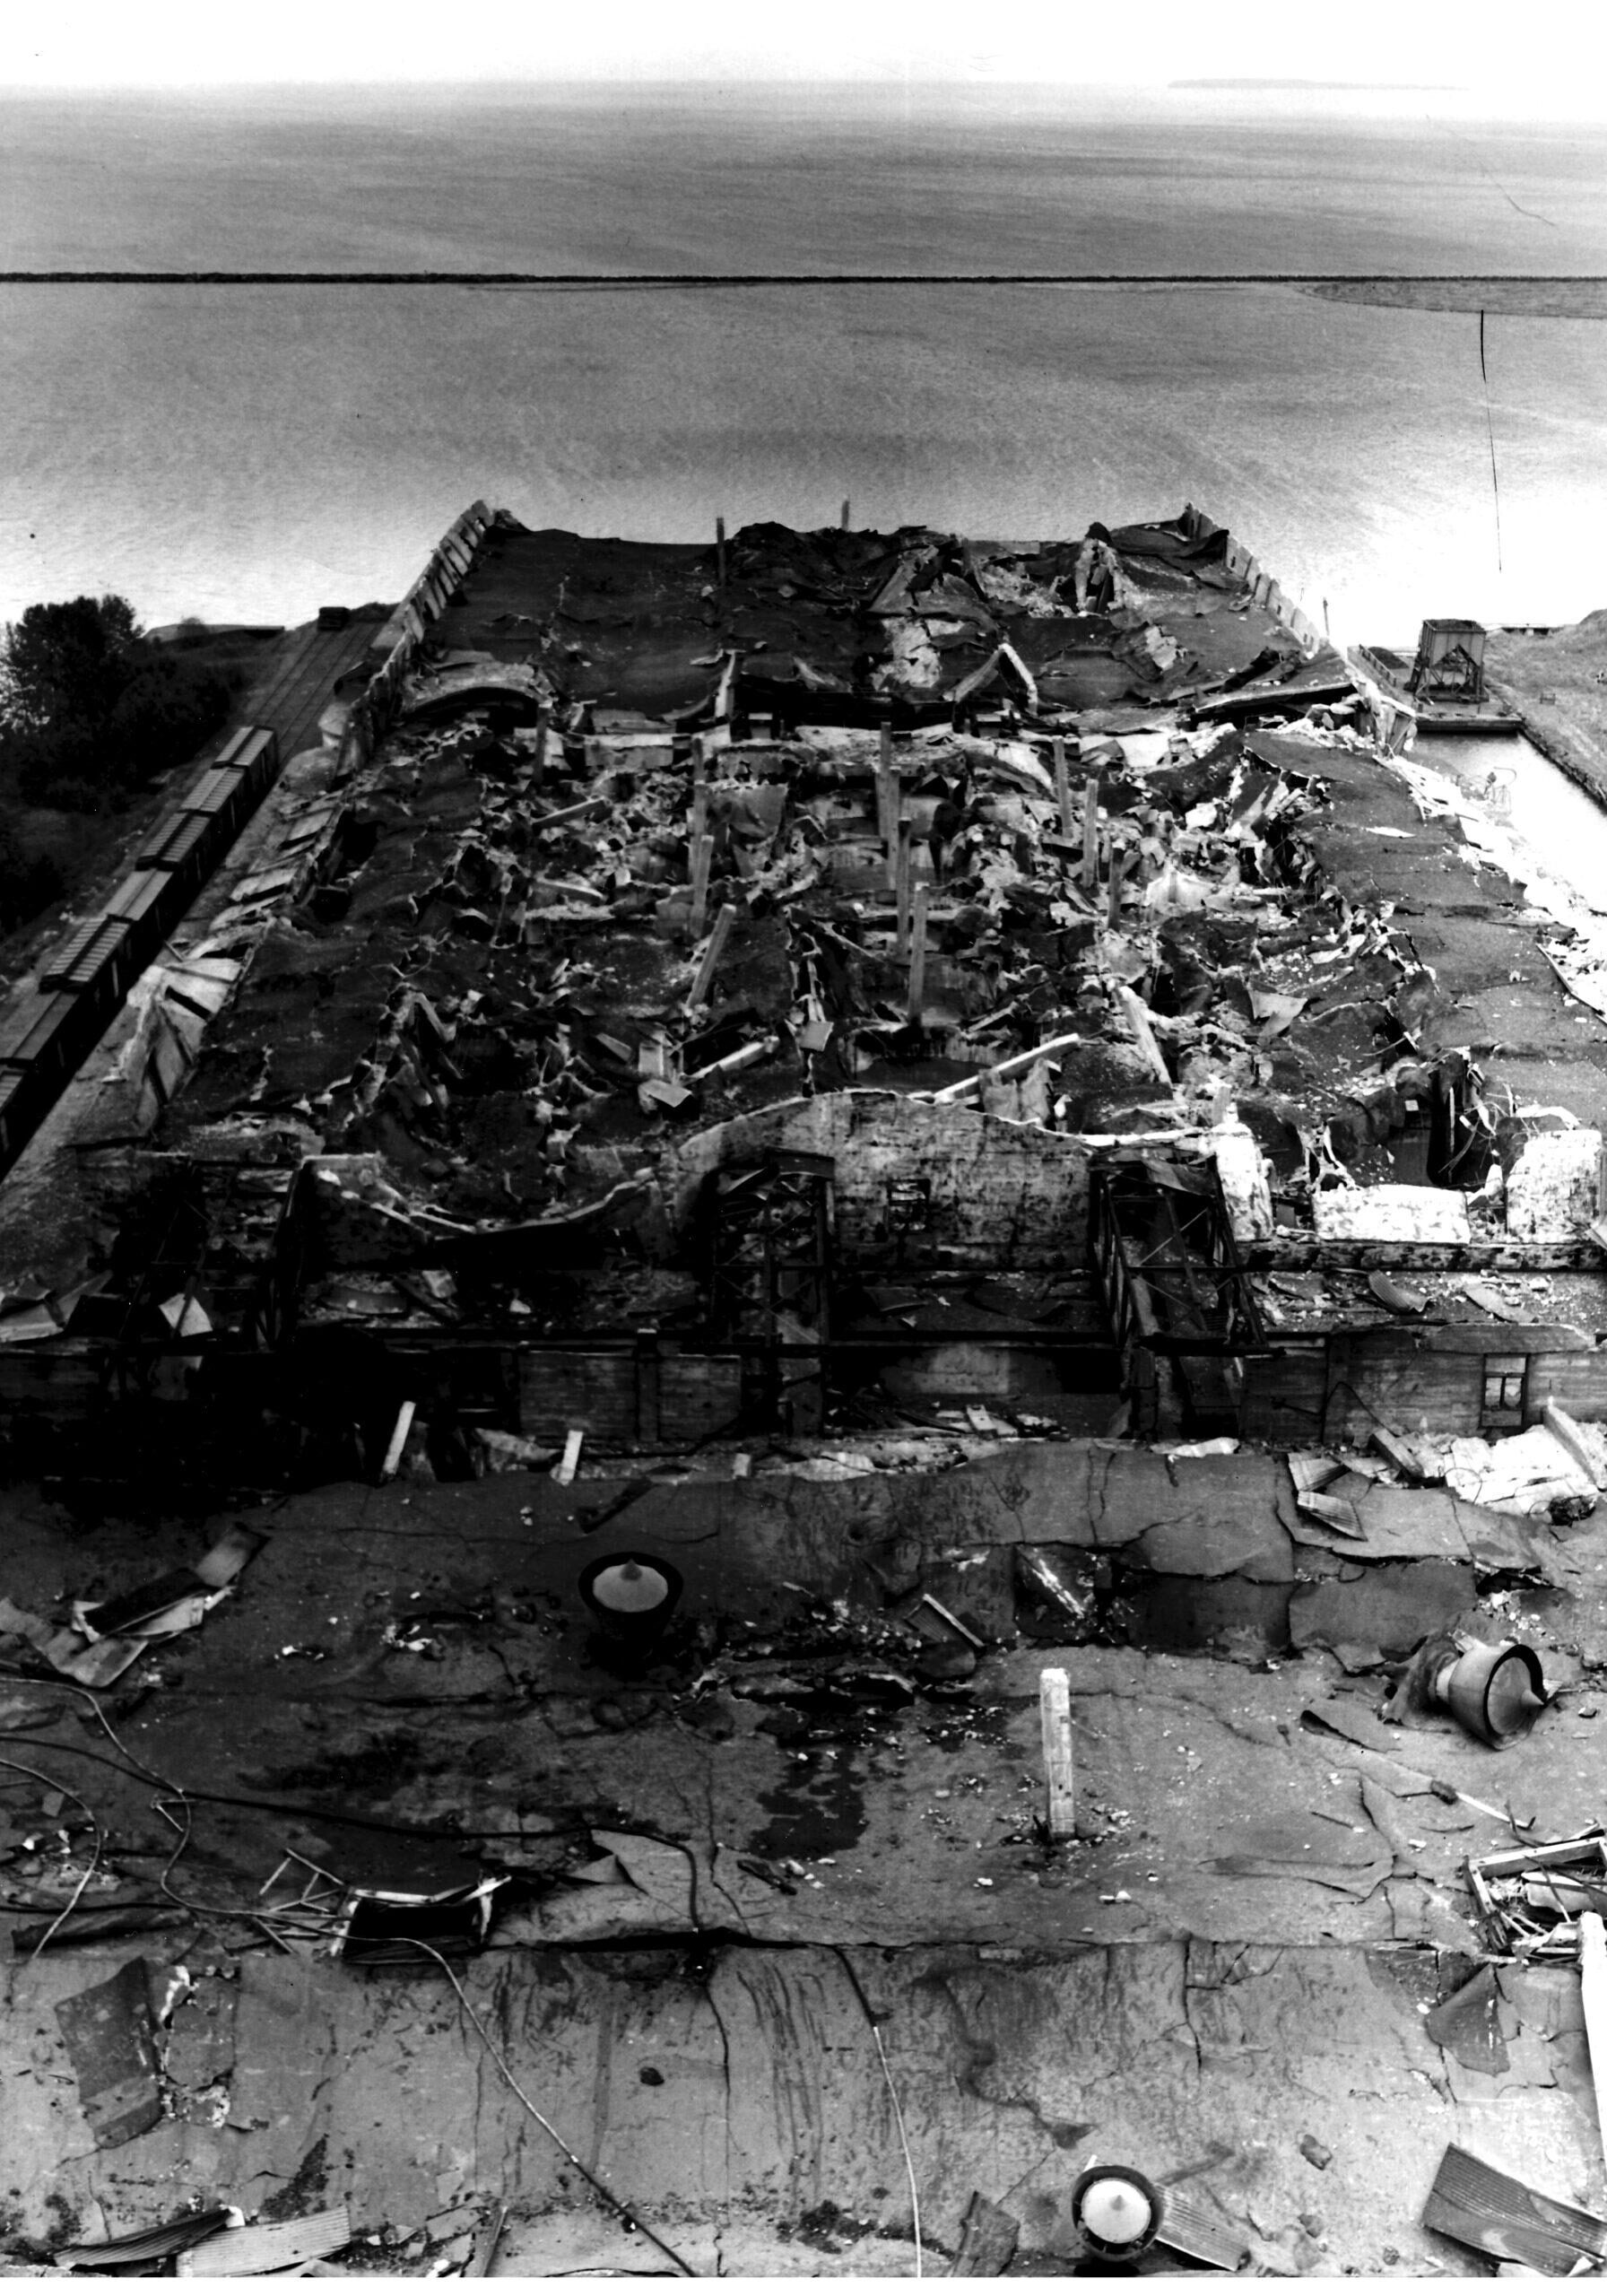 black and white birds eye view of the explosion